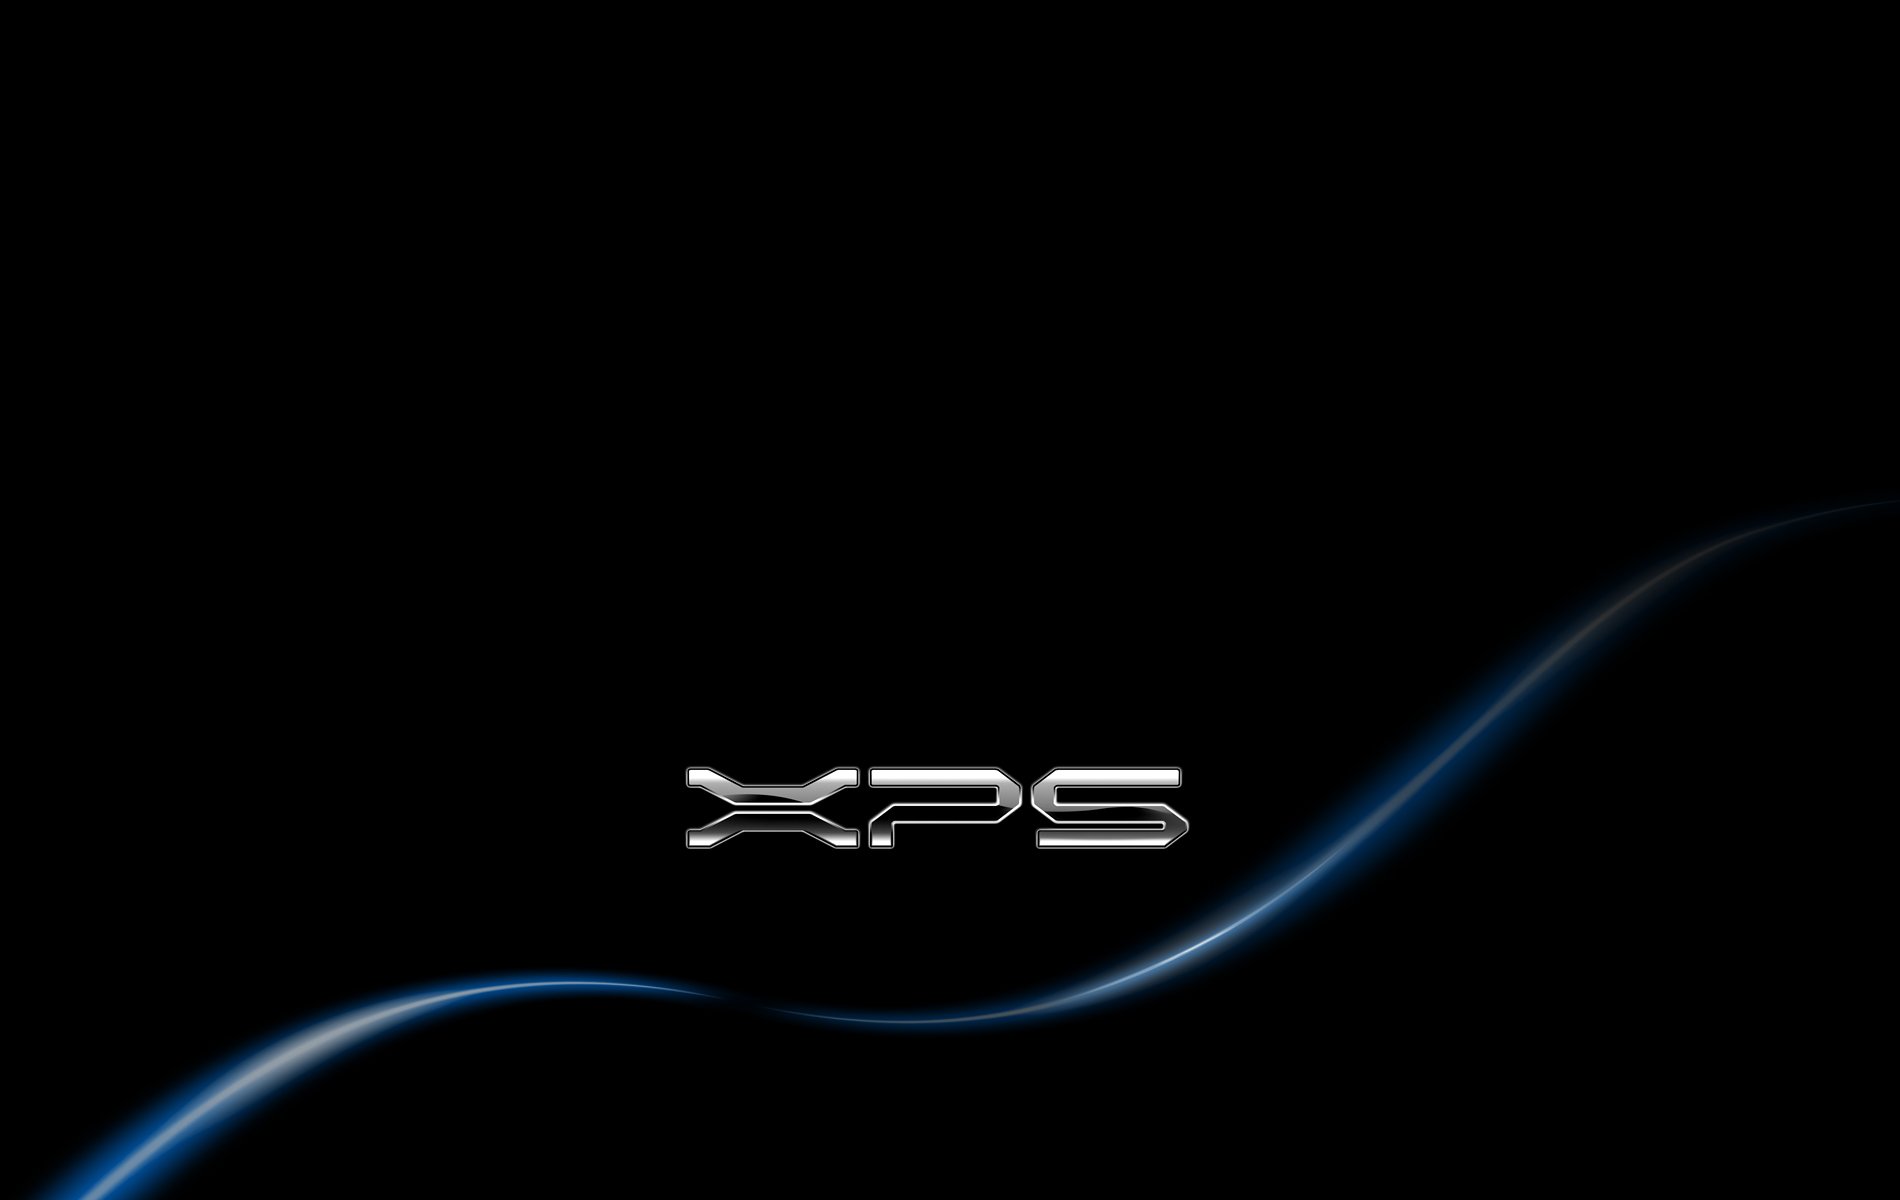 48+] Wallpaper for Dell XPS 13 on